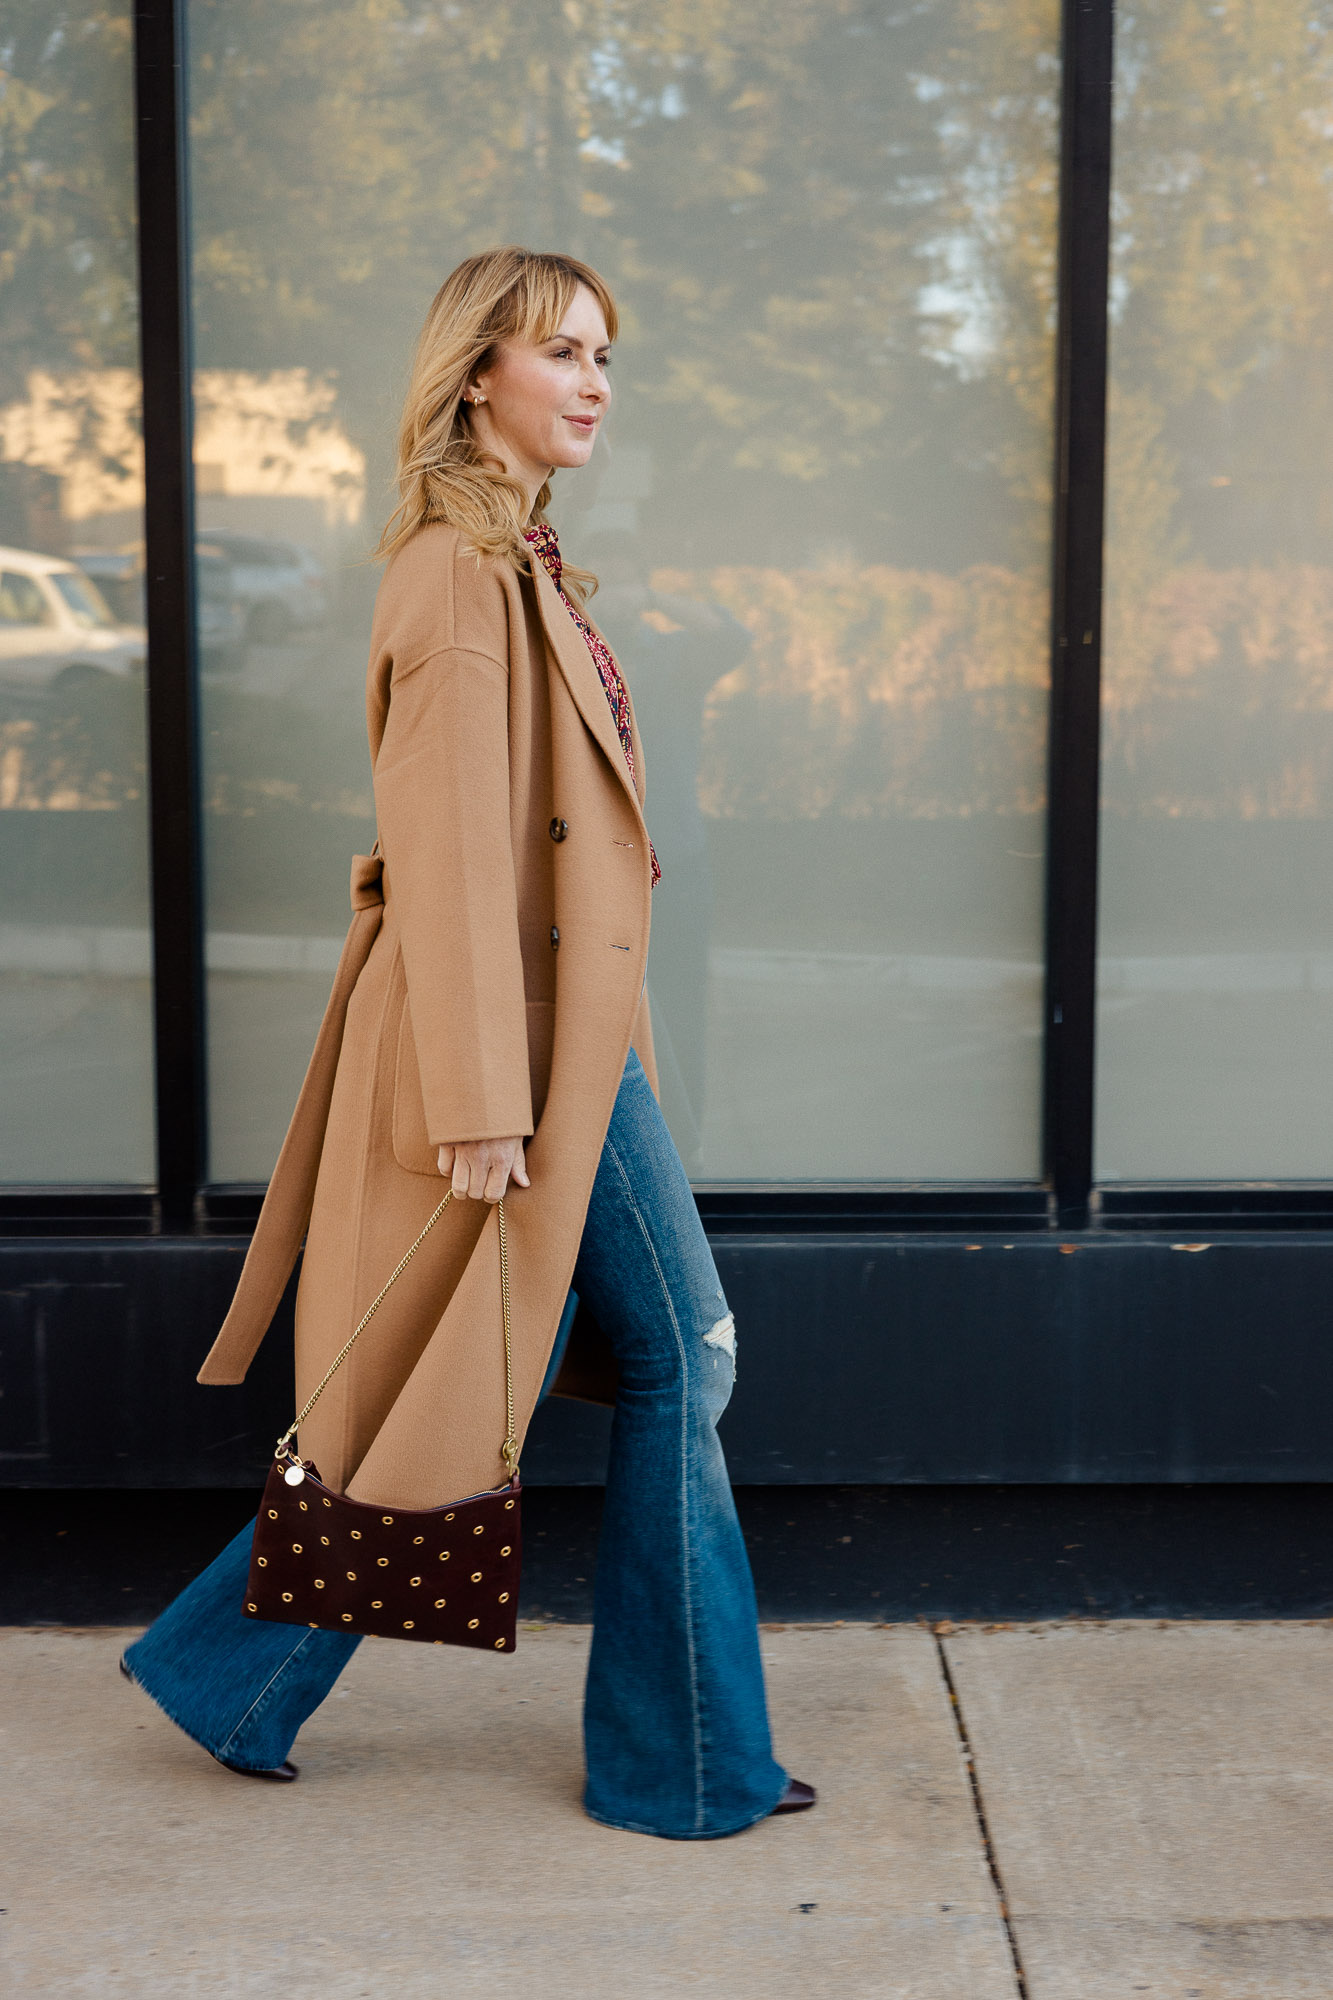 Wearing the Anine Bing Dylan camel coat in camel over Mother flares.